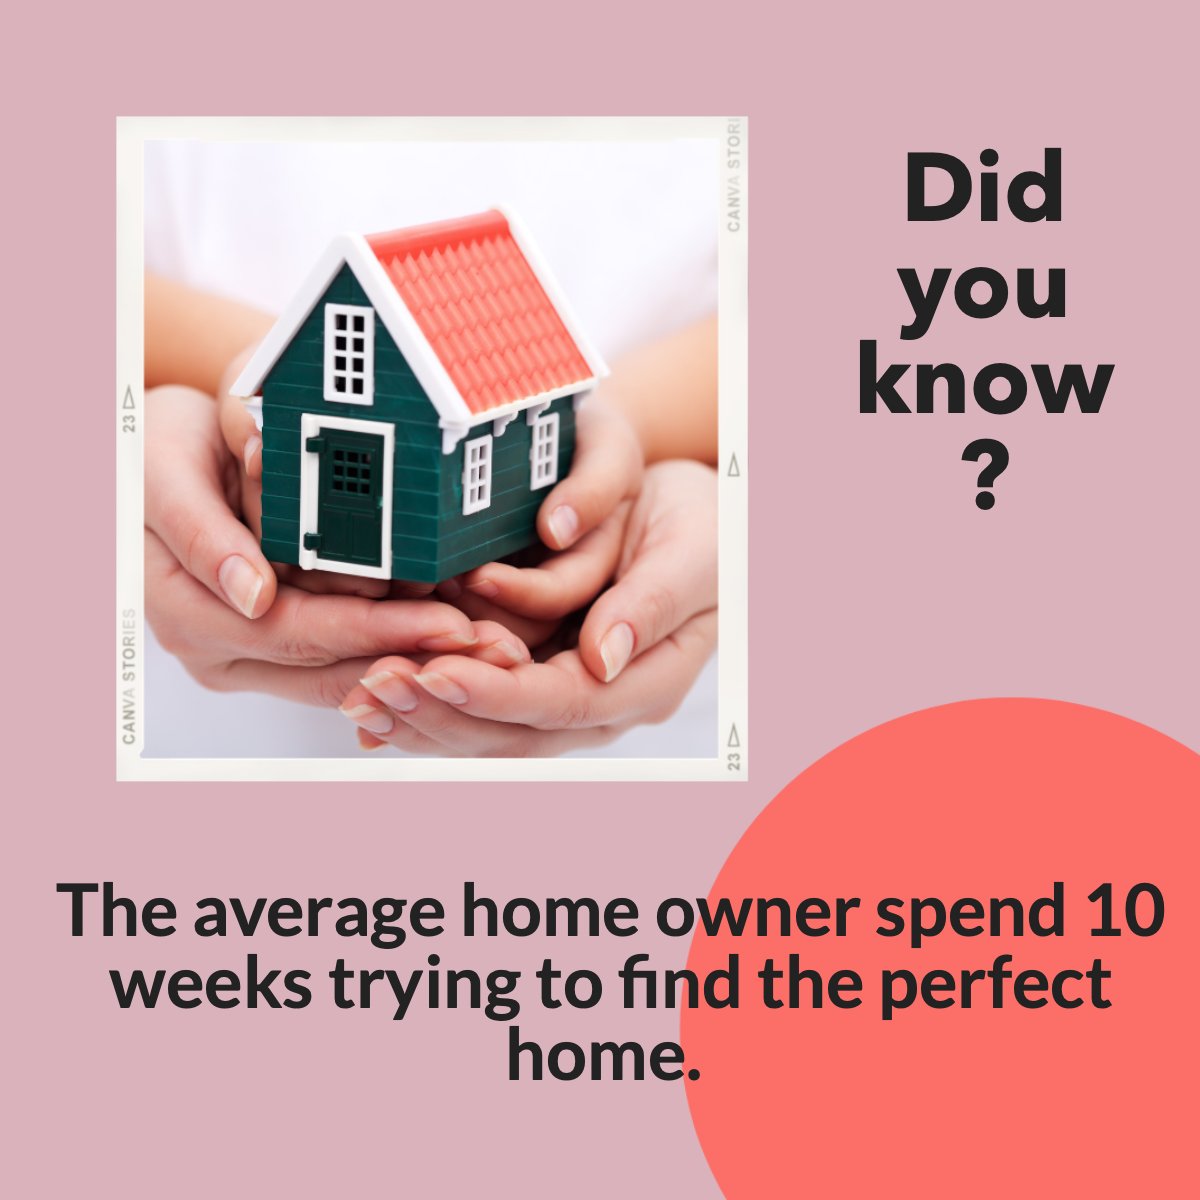 Did you know how long the homeowners spent looking for the perfect home? 👀

#homeowners    #perfecthome    #homeownershipgoals    #perfectfamilyhome
#realtynewengland #mannymenezesgroup #realtyne #wesellnewengland #welovenewengland #ilovenewengland #massrealestate